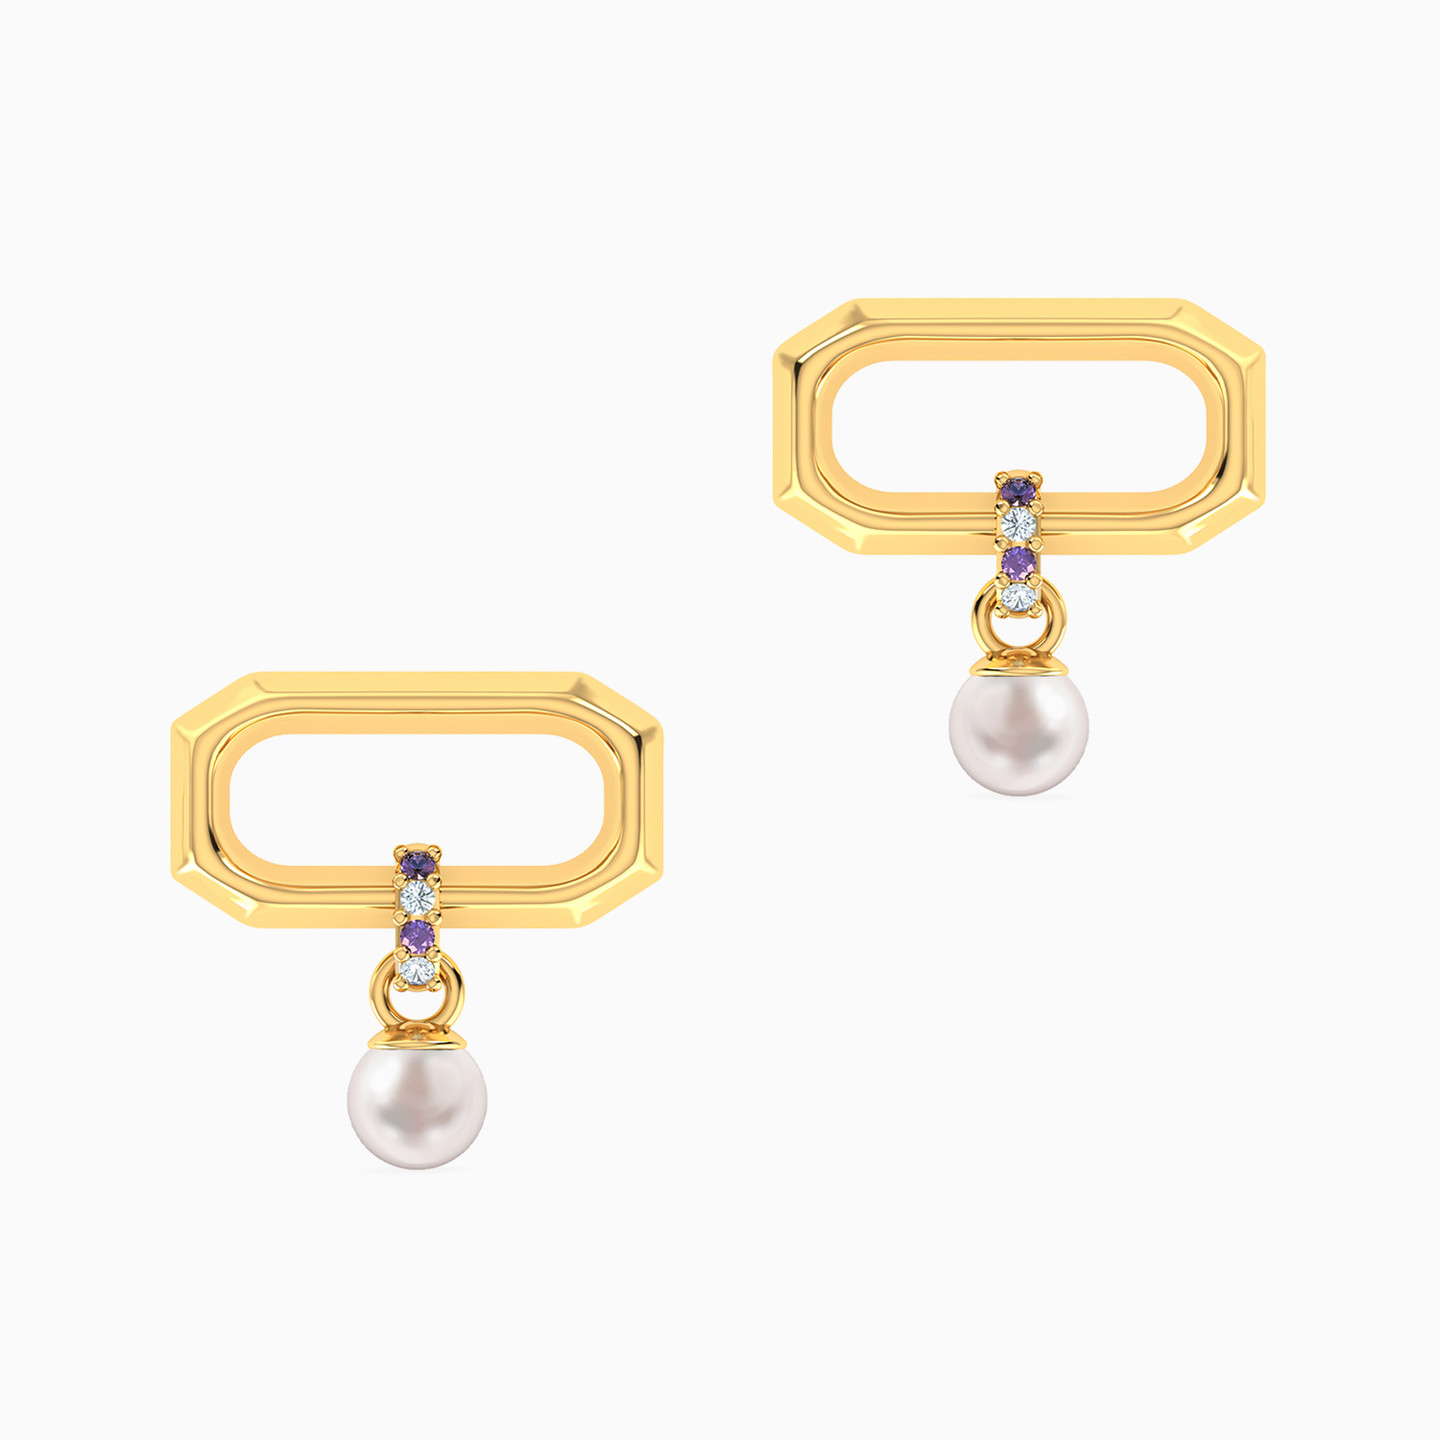 Rectangle Shaped Pearls & Colored Stones Drop Earrings in 18K Gold